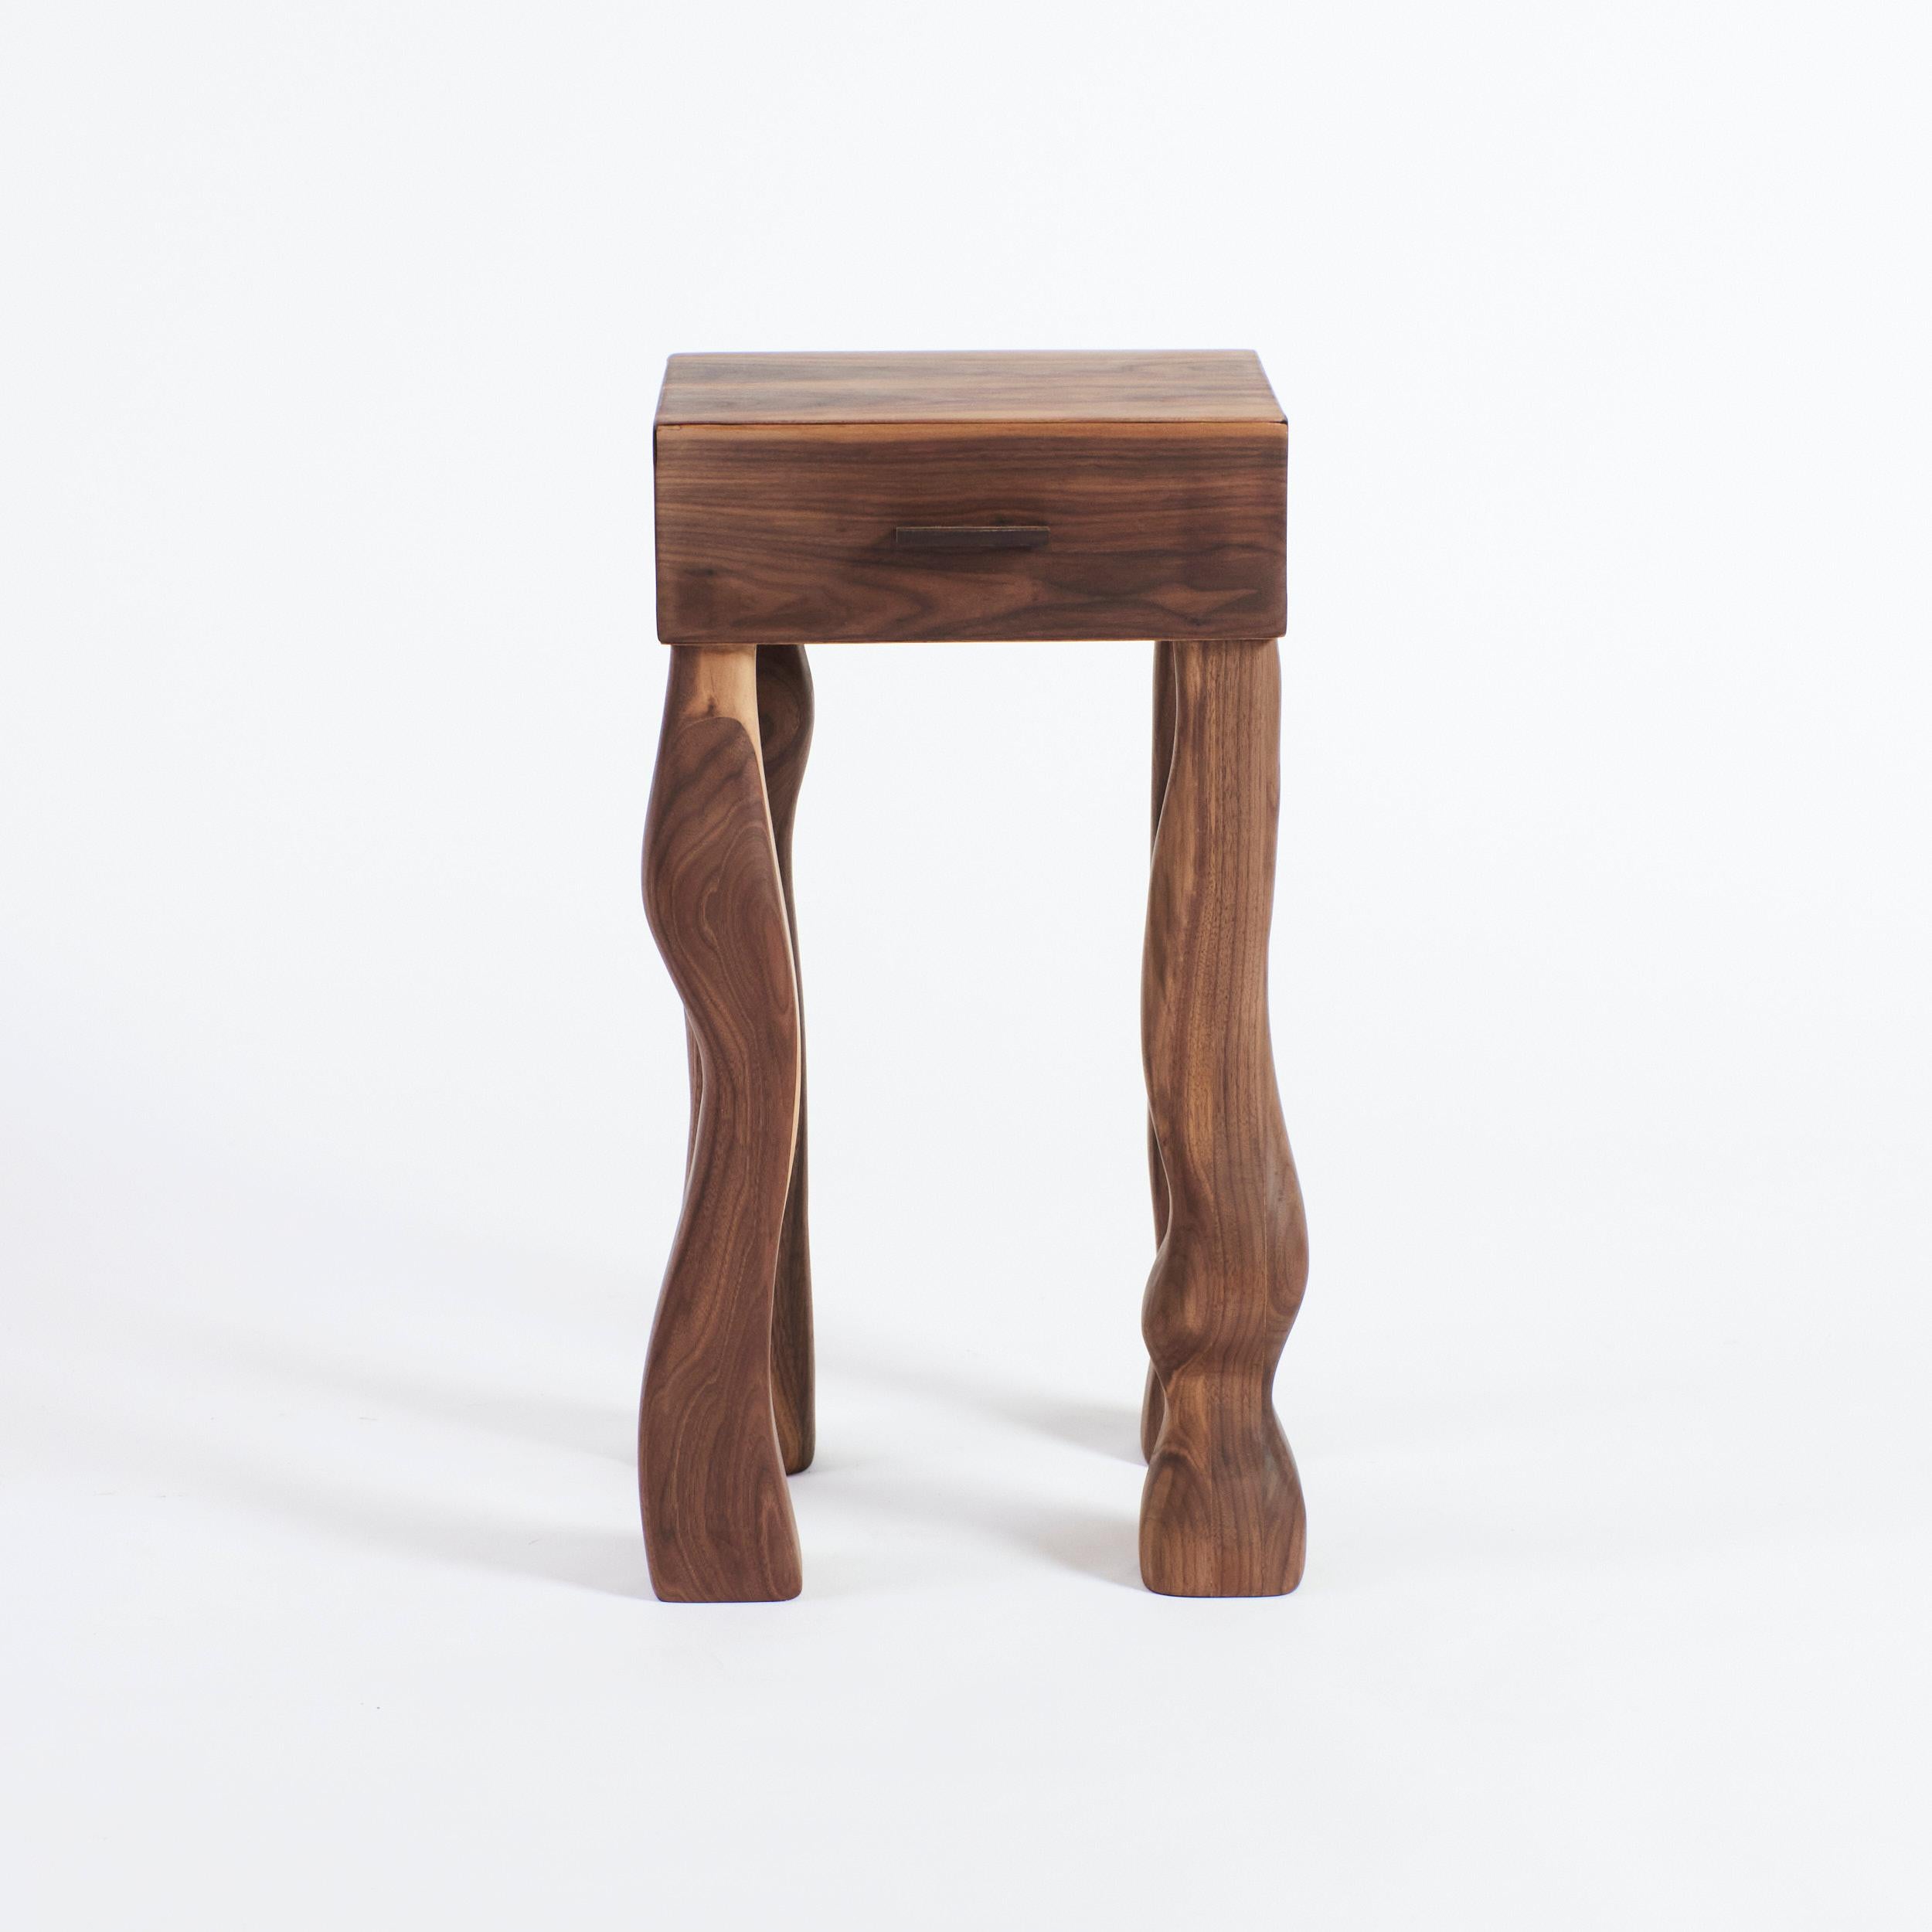 Foot Side Table With Drawer by Project 213A
Dimensions: W 32 x D 28 x H 62 cm
Materials: Walnut

The Foot Side Table is made from Oak wood with carefully designed jointing details. The drawer stands on 4 irregular legs of which one has a foot. The